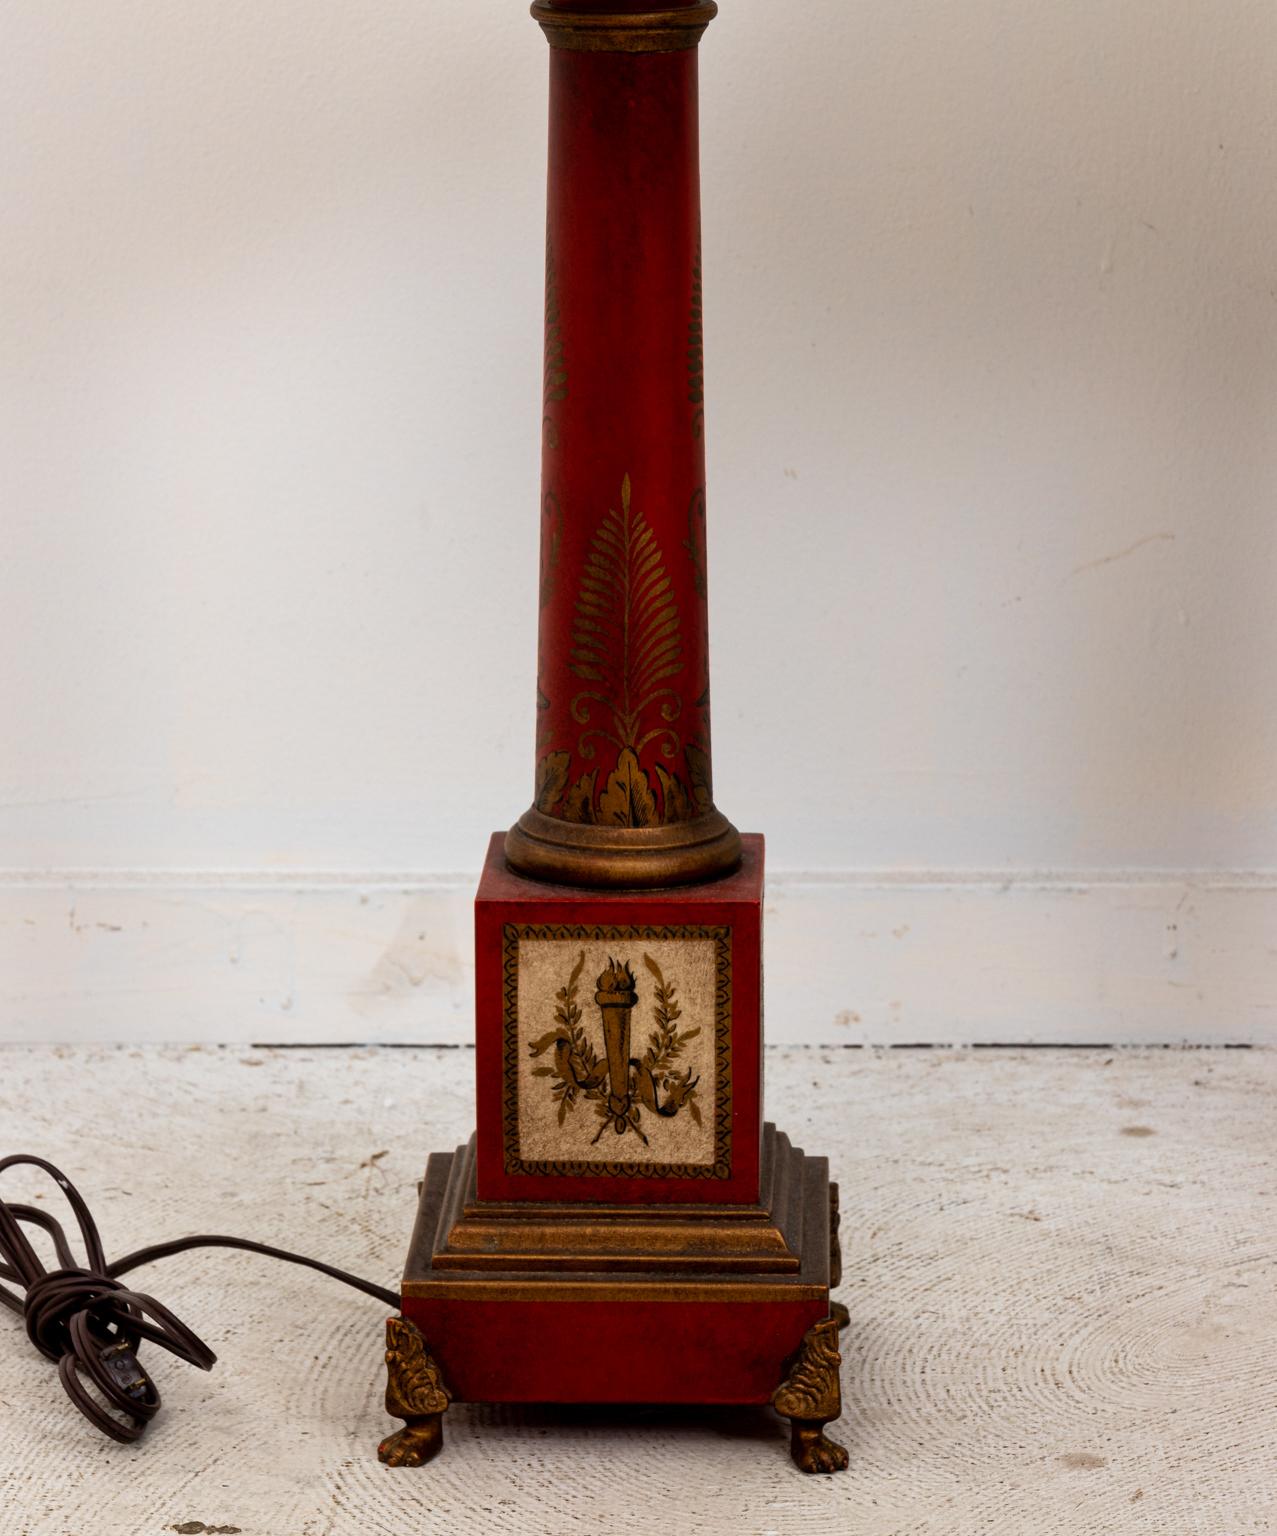 Pair of Chinoiserie style tole table lamps with column shaped body on a plinth base. The lamp is further painted with motifs of anthemions on the column and a flaming torch framed by Roman laurel wreaths on the base. Shades not included. Please note